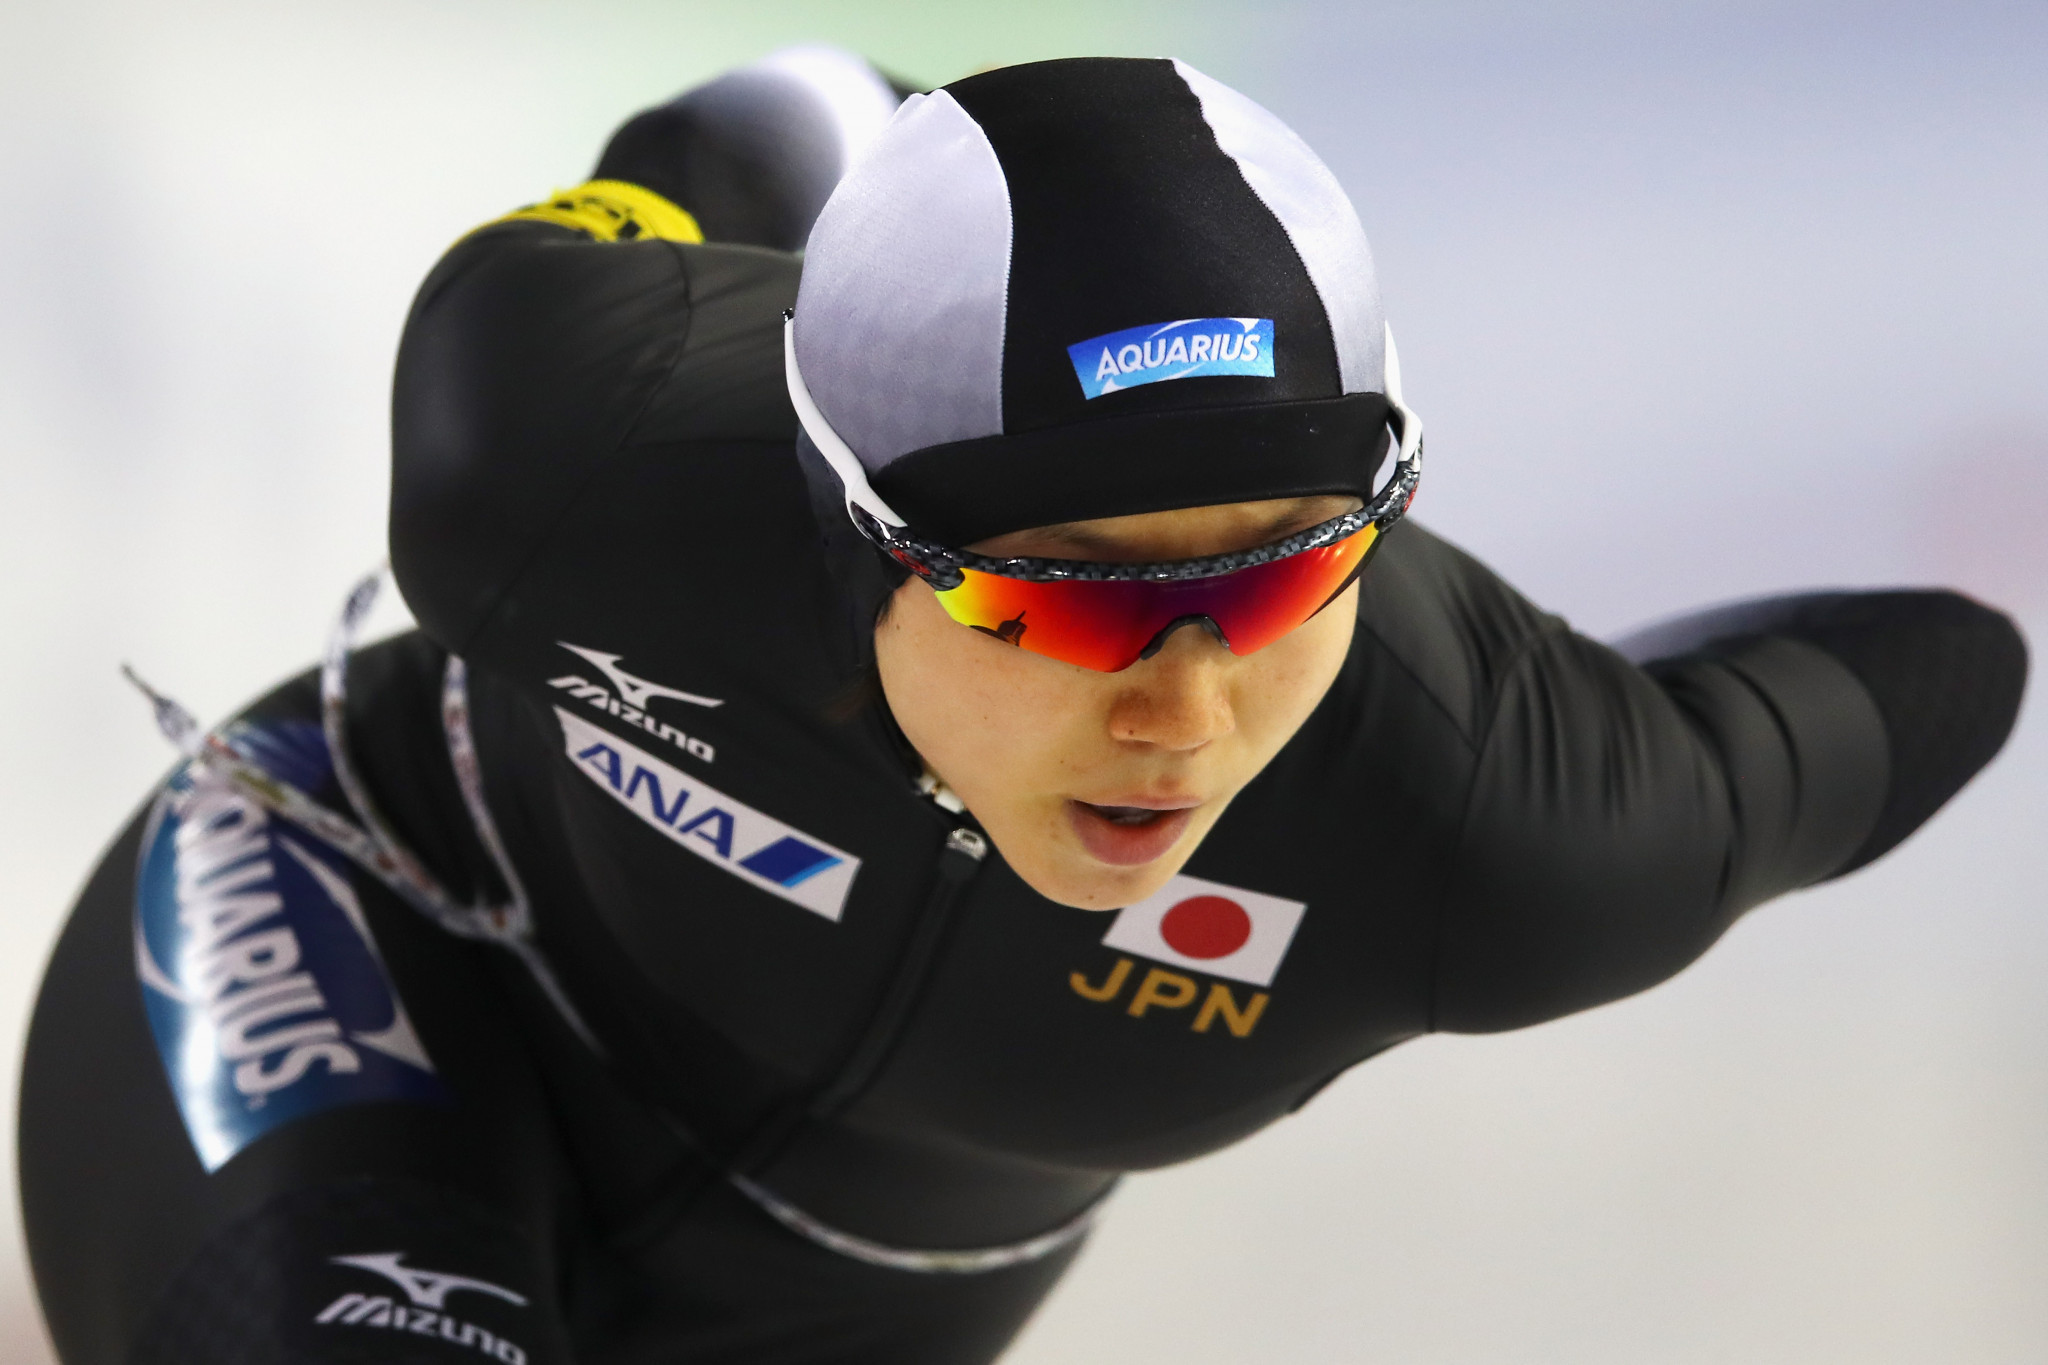 Miho Takagi is in pole position in the women's World Cup rankings ©Getty Images